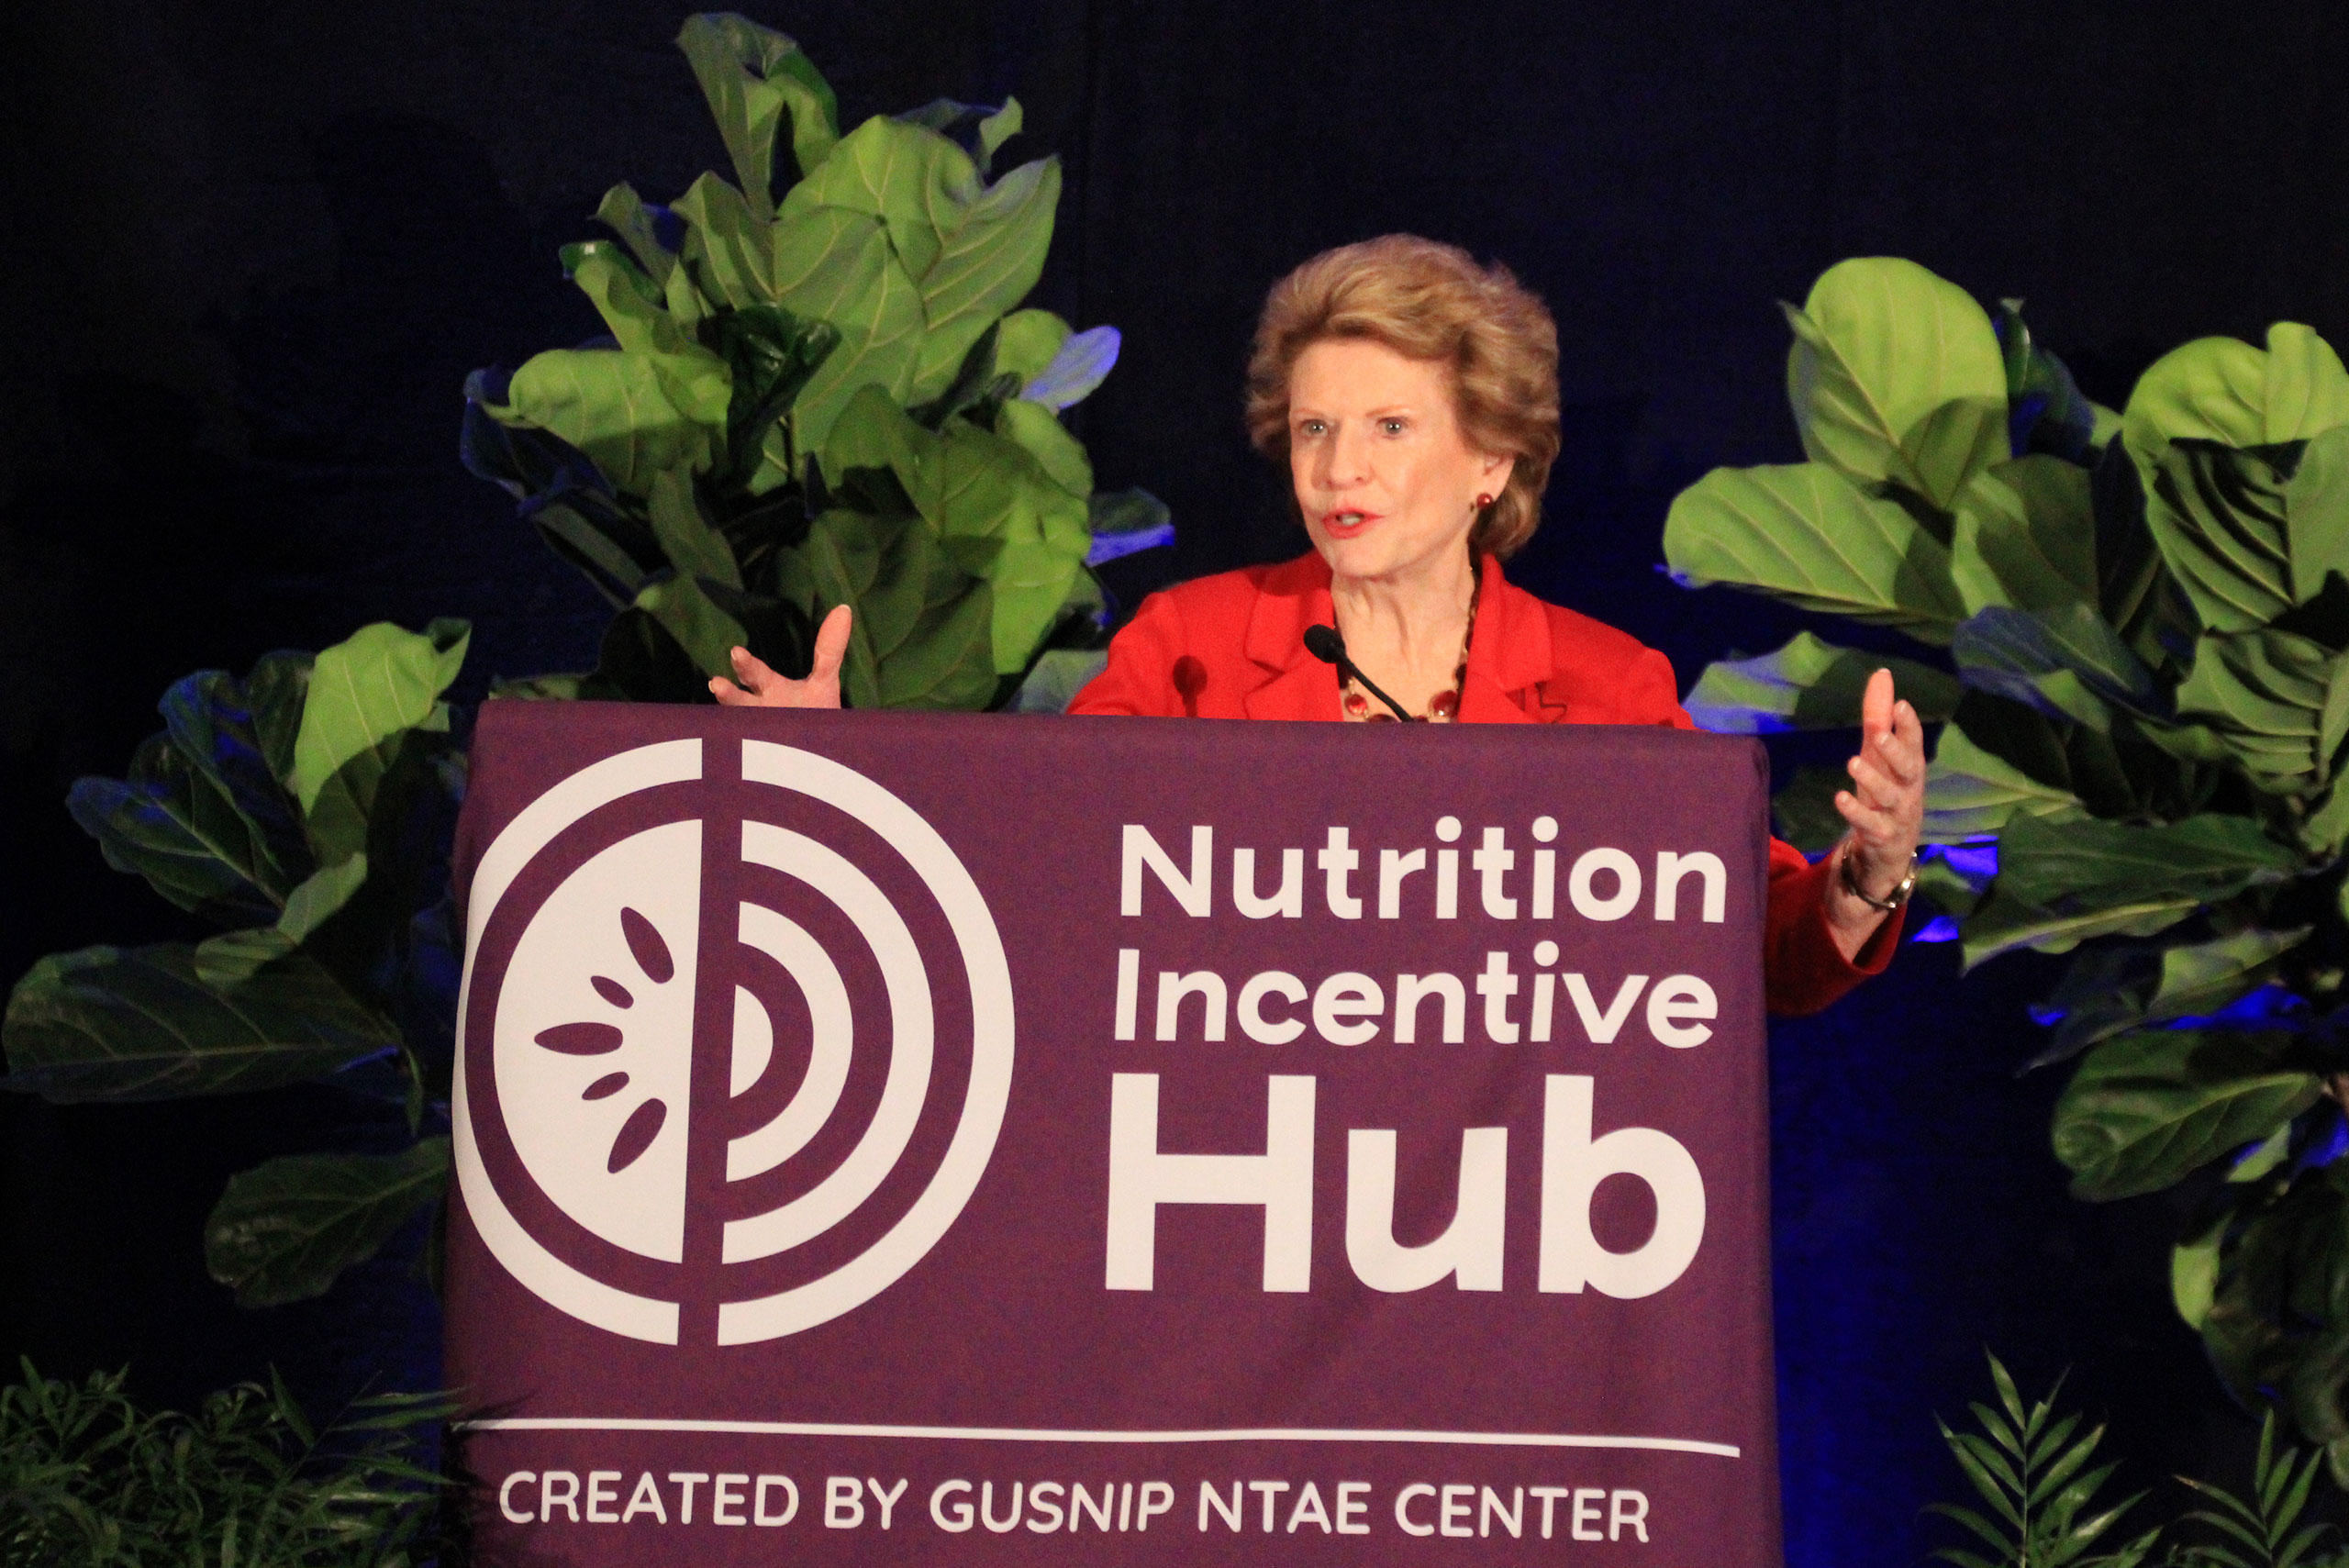 Senate Agriculture Committee Chairwoman Debbie Stabenow speaking at the Nutrition Incentive Hub National Convening in Arlington, Virginia in June 2023.